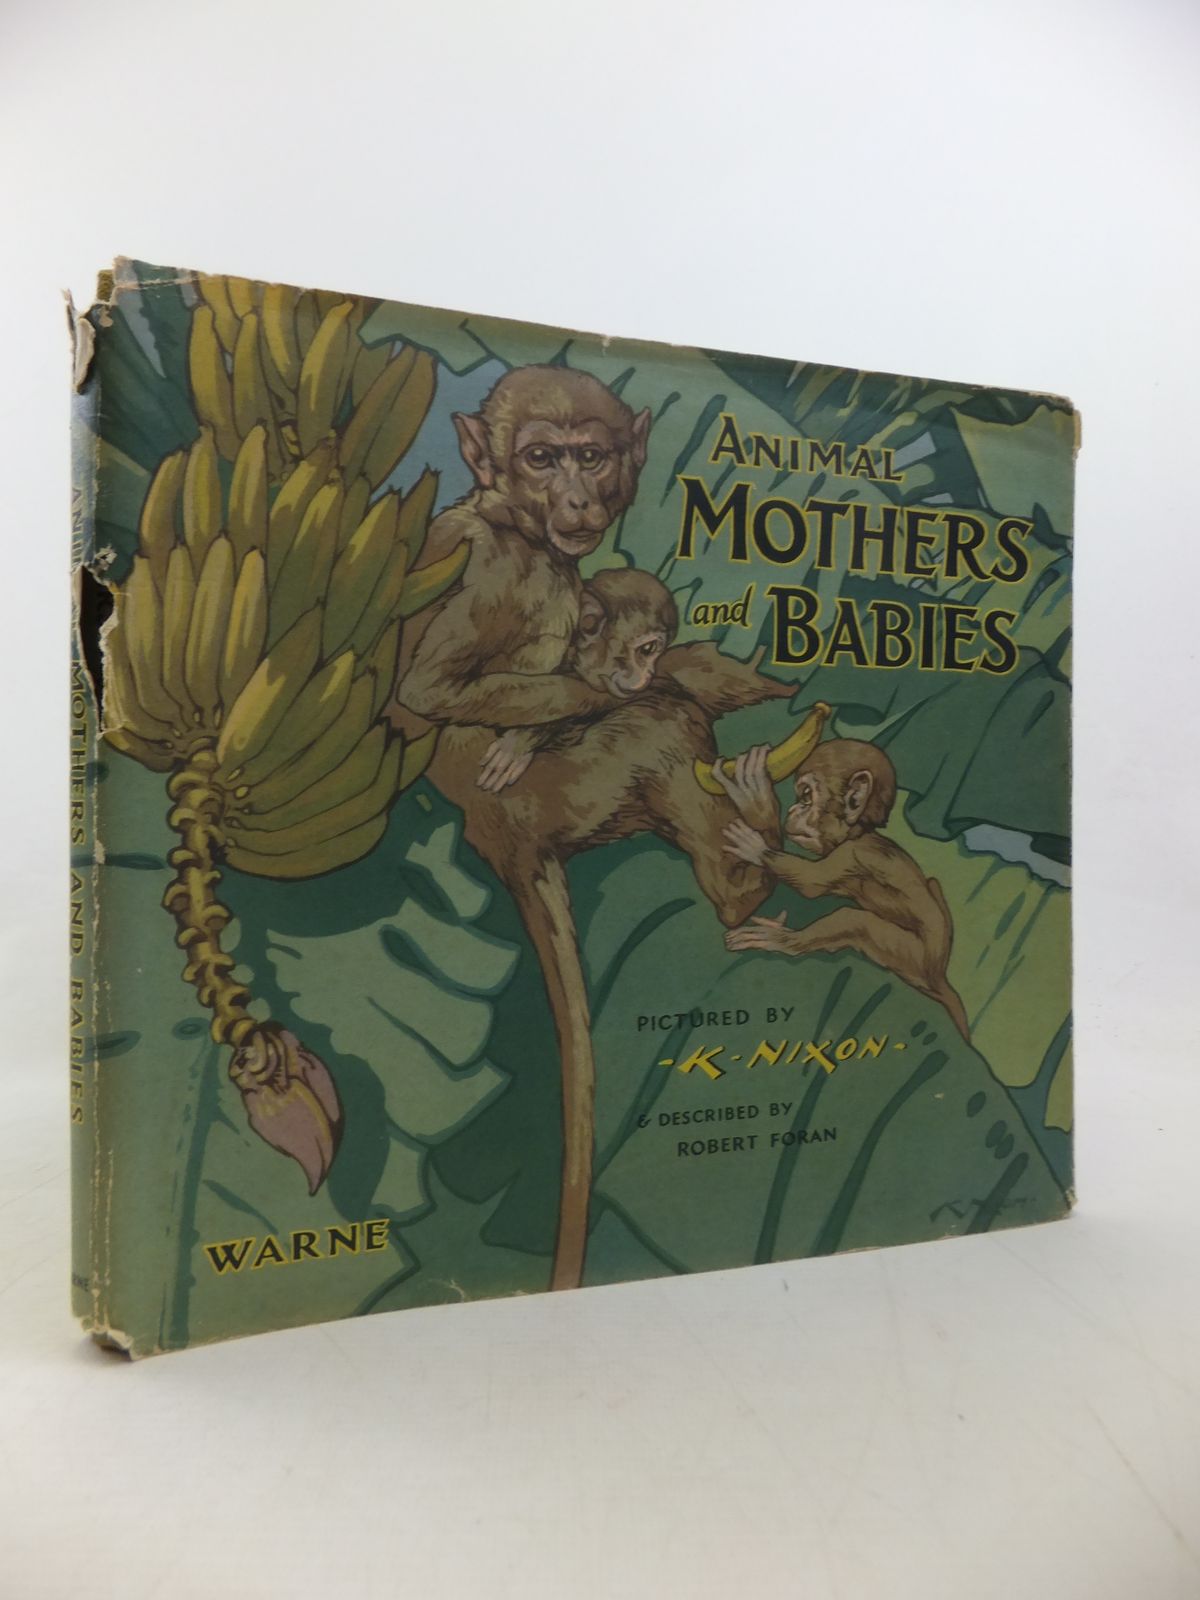 Stella & Rose's Books : ANIMAL MOTHERS AND BABIES Written By Robert Foran,  STOCK CODE: 1811215